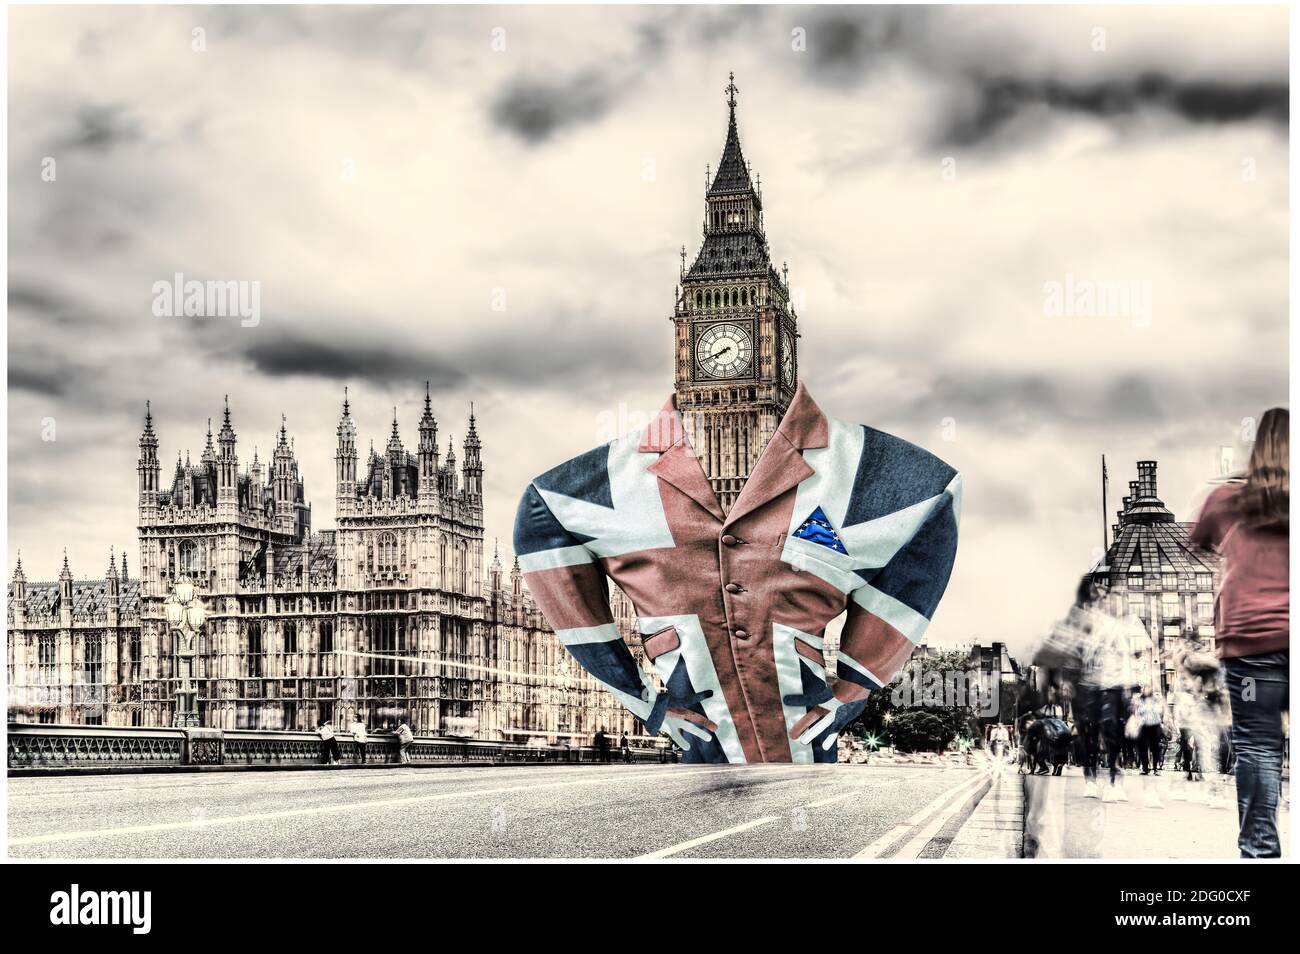 Lord Big Ben dressed in a flag of England, Brexit deal with EU or not deal, United Kingdom Stock Photo